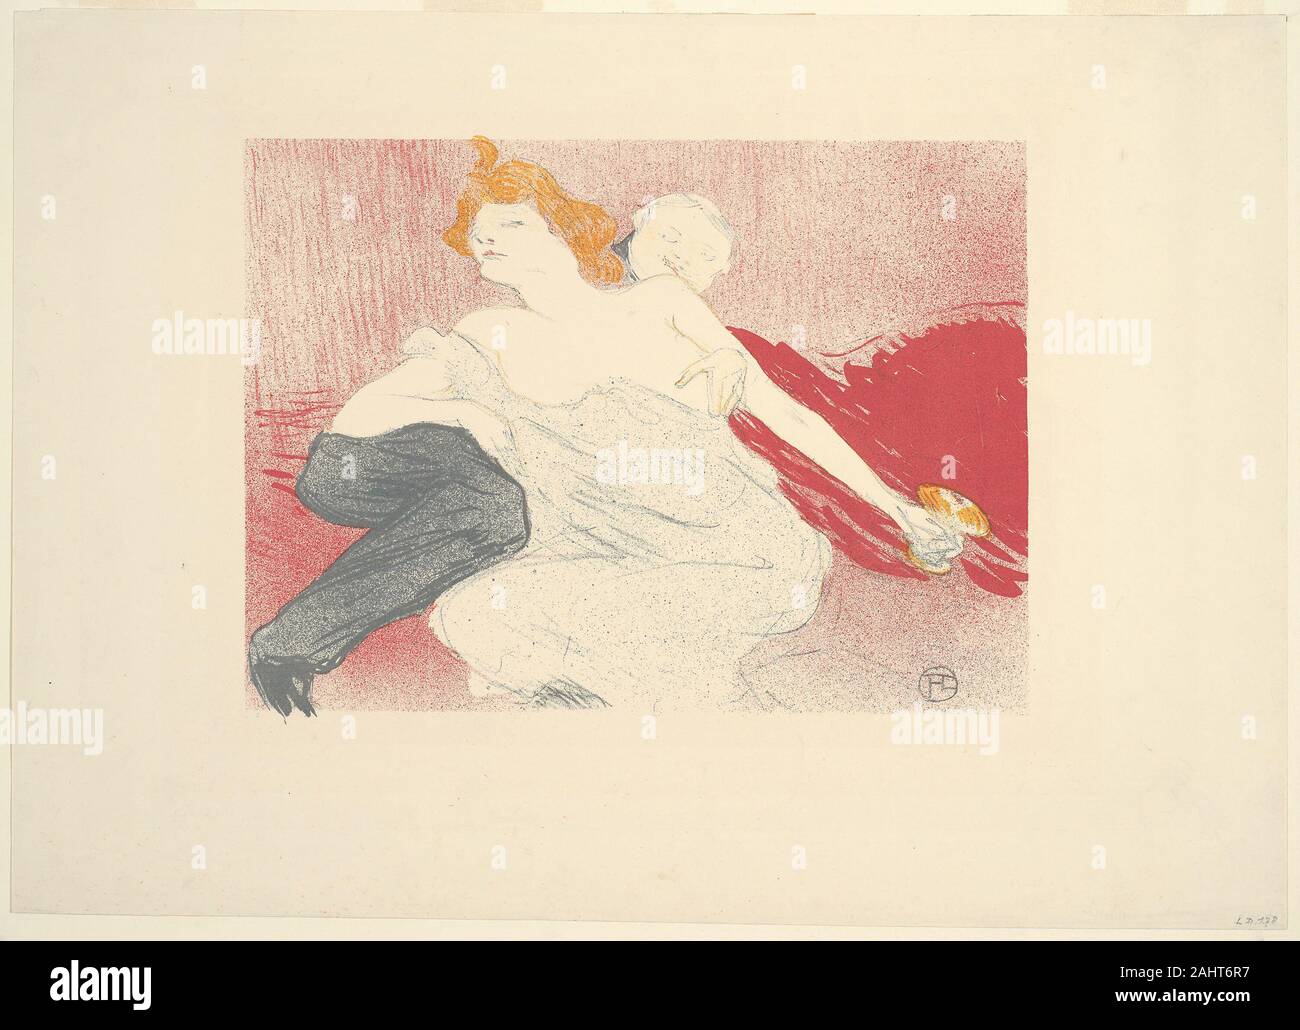 Henri de Toulouse-Lautrec. Debauchery (second plate). 1896. France. Color lithograph on cream wove paper Paris was the undisputed artistic and cultural capital of Europe in the late 19th century; it was also home to a thriving population of prostitutes. As Hollis Clayson observed in her study of prostitution and French art, Painted Love, artists of the period, particularly the Impressionists, enthusiastically embraced the activities of these women through varying degrees of realistic imagery. The increasingly abstract depictions of prostitutes’ everyday pursuits, from bathing to entertaining c Stock Photo